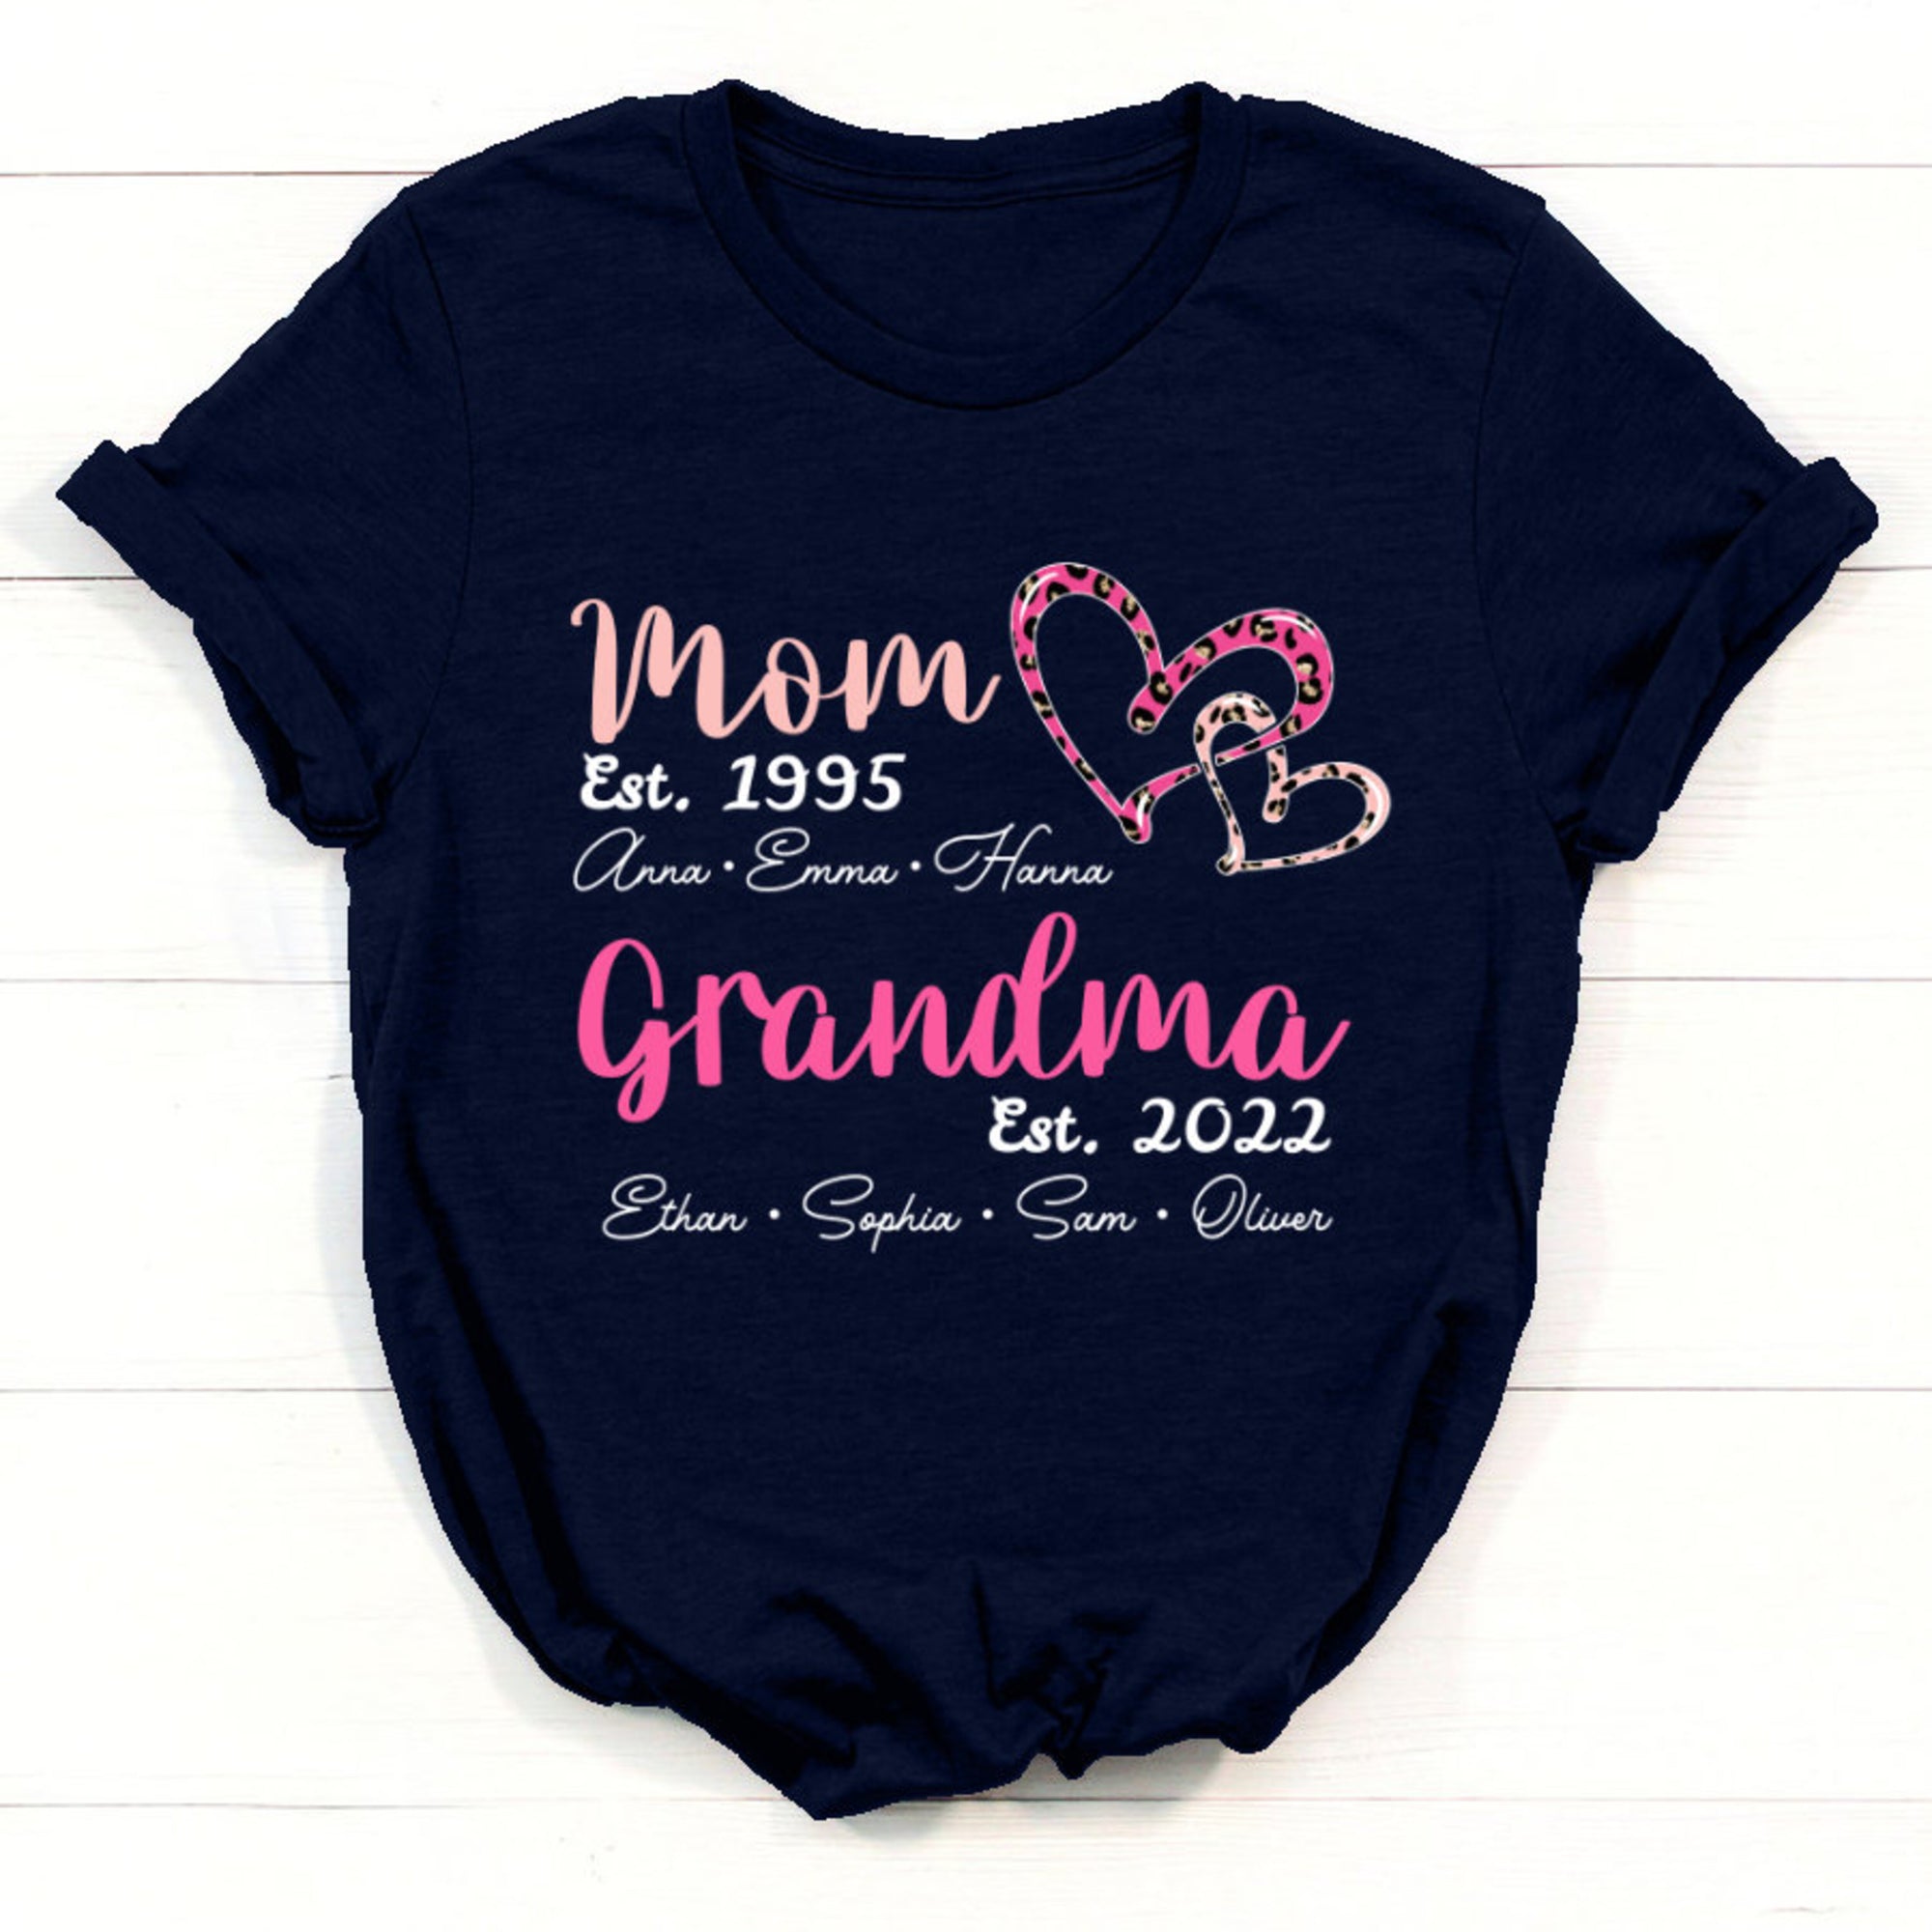 Mom Est Grandma Est Leopard Heart With Kid Names - Personalized Shirt - Gift For Grandma